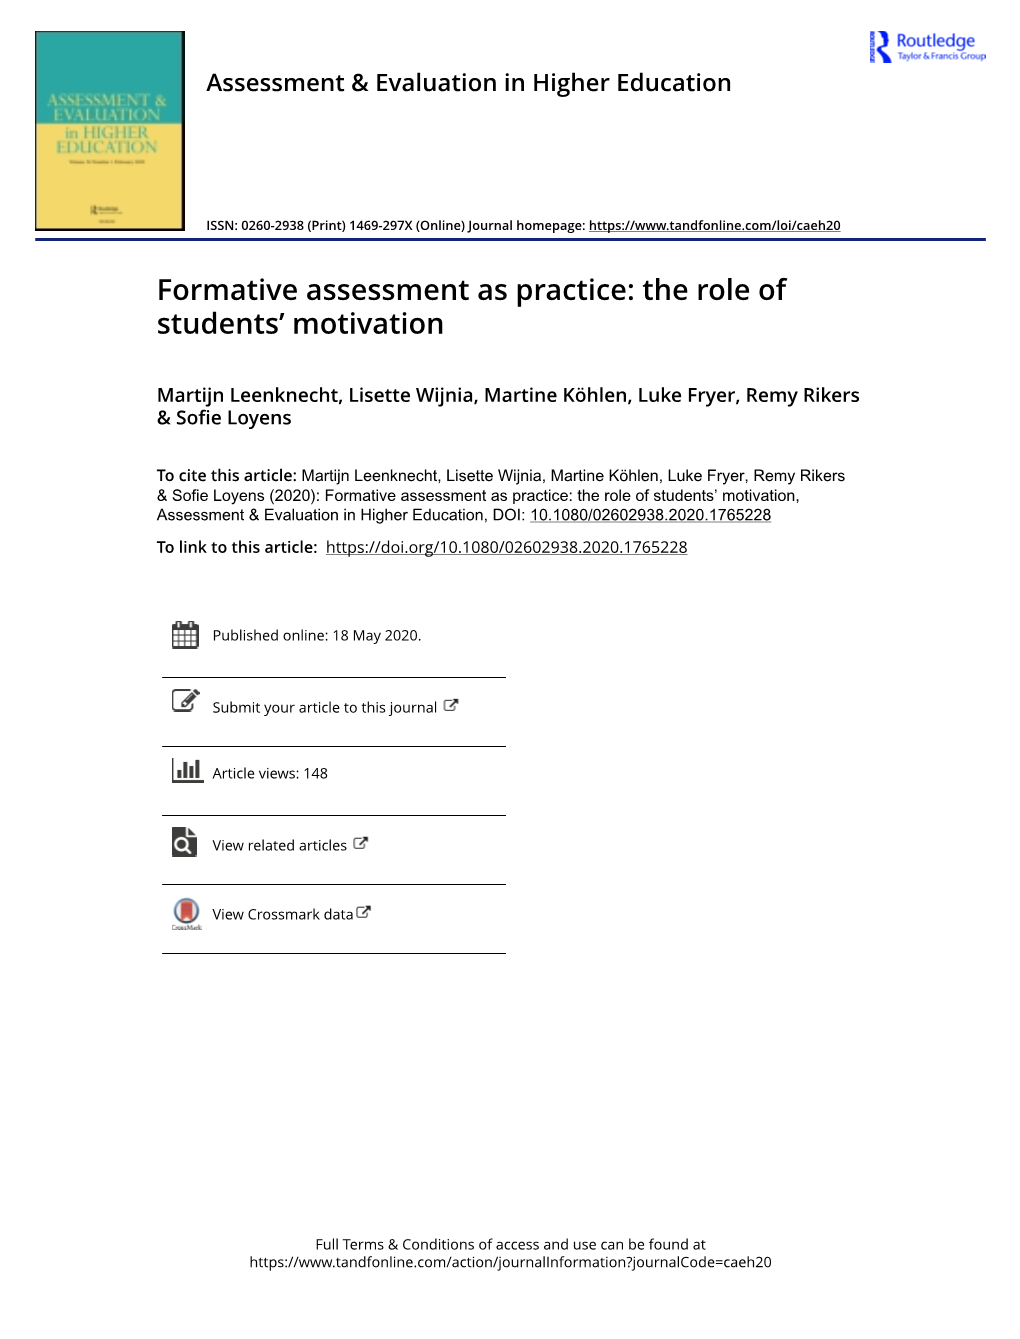 Formative Assessment As Practice: the Role of Students' Motivation